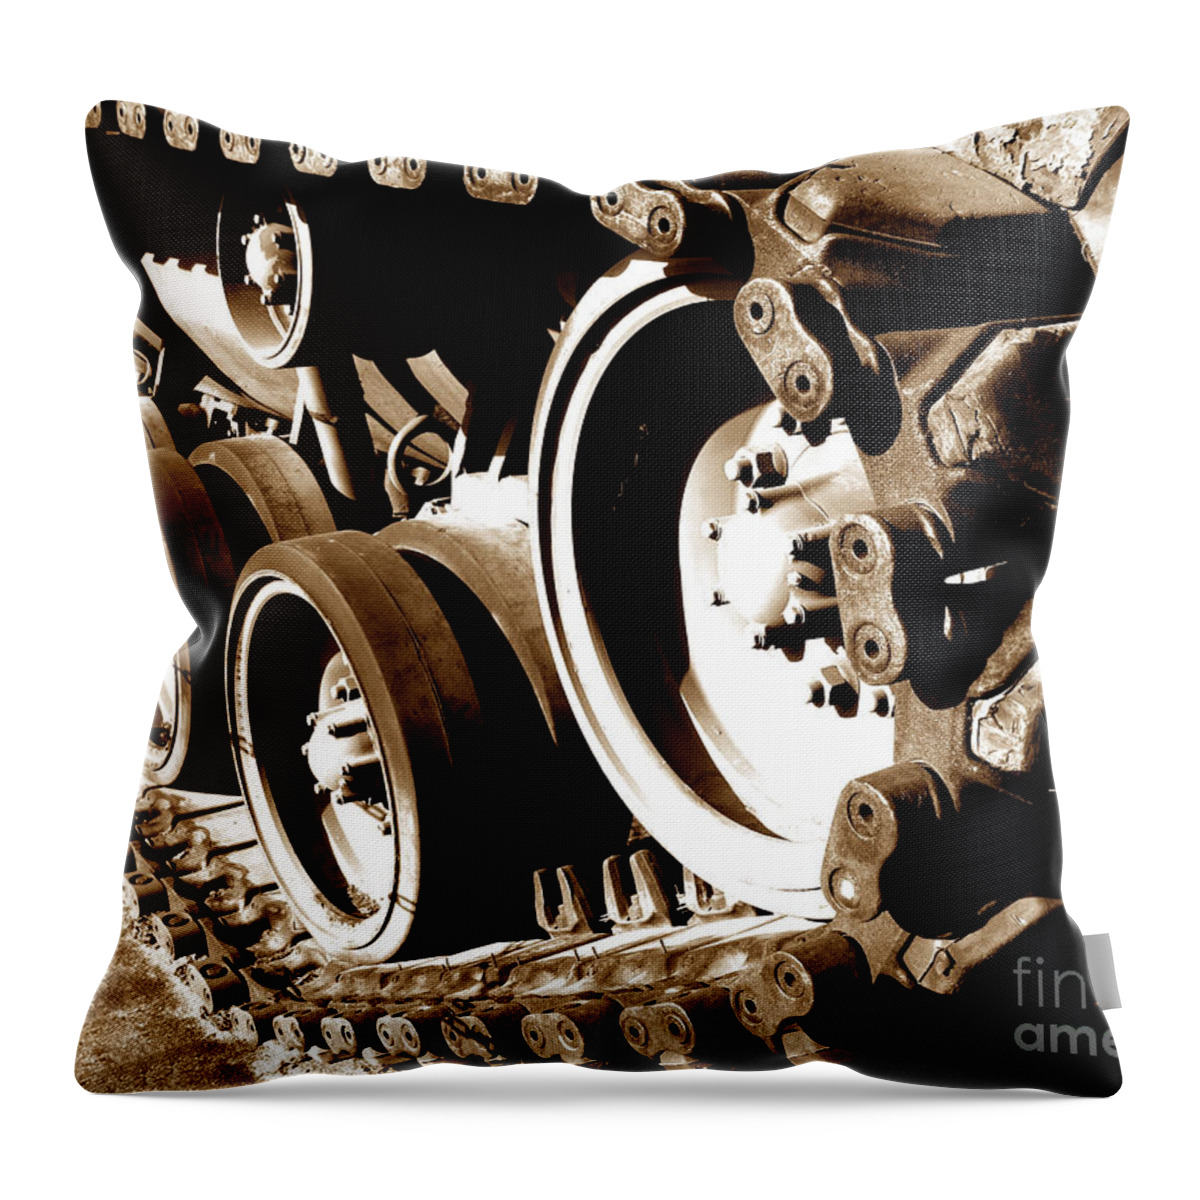 Patton Throw Pillow featuring the photograph Tank Tracks by Olivier Le Queinec